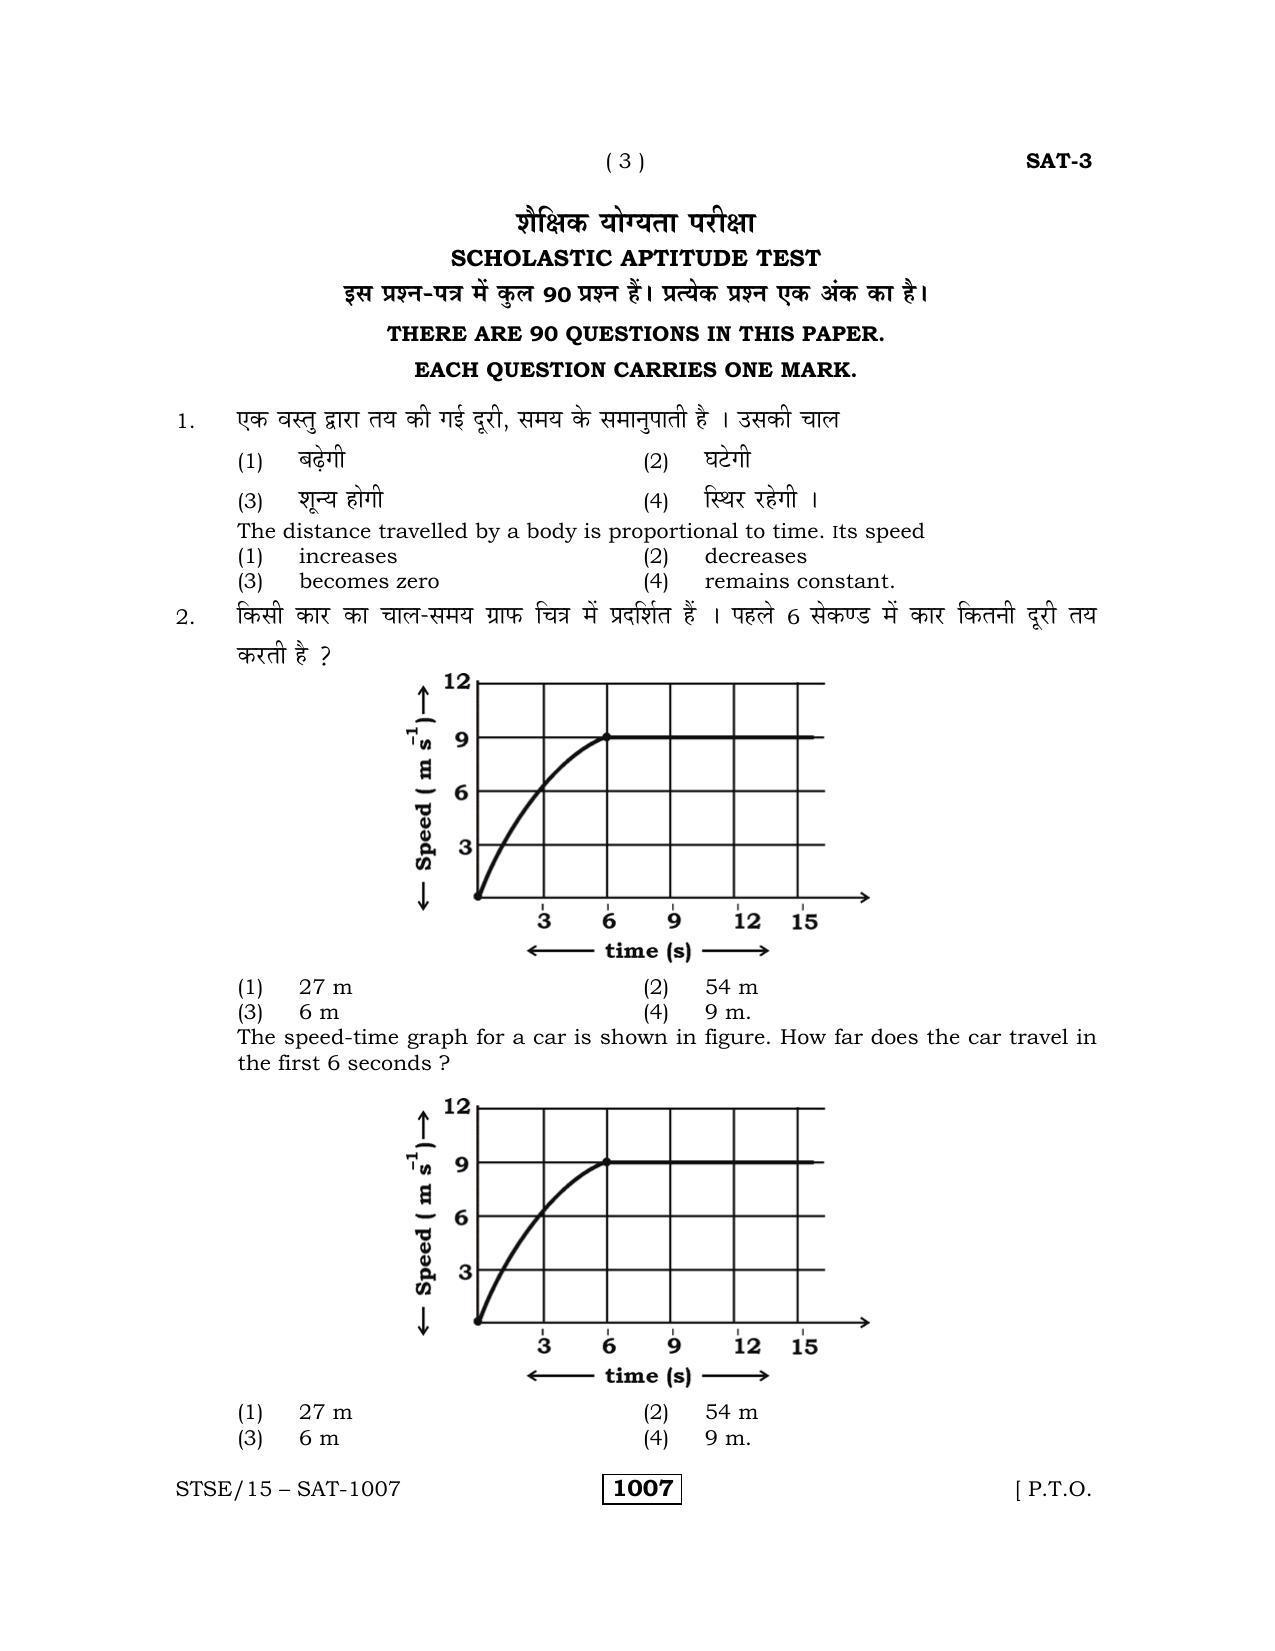 Rajasthan STSE Class 12 (Scholastic Aptitude Test) Question Paper 2015 - Page 3